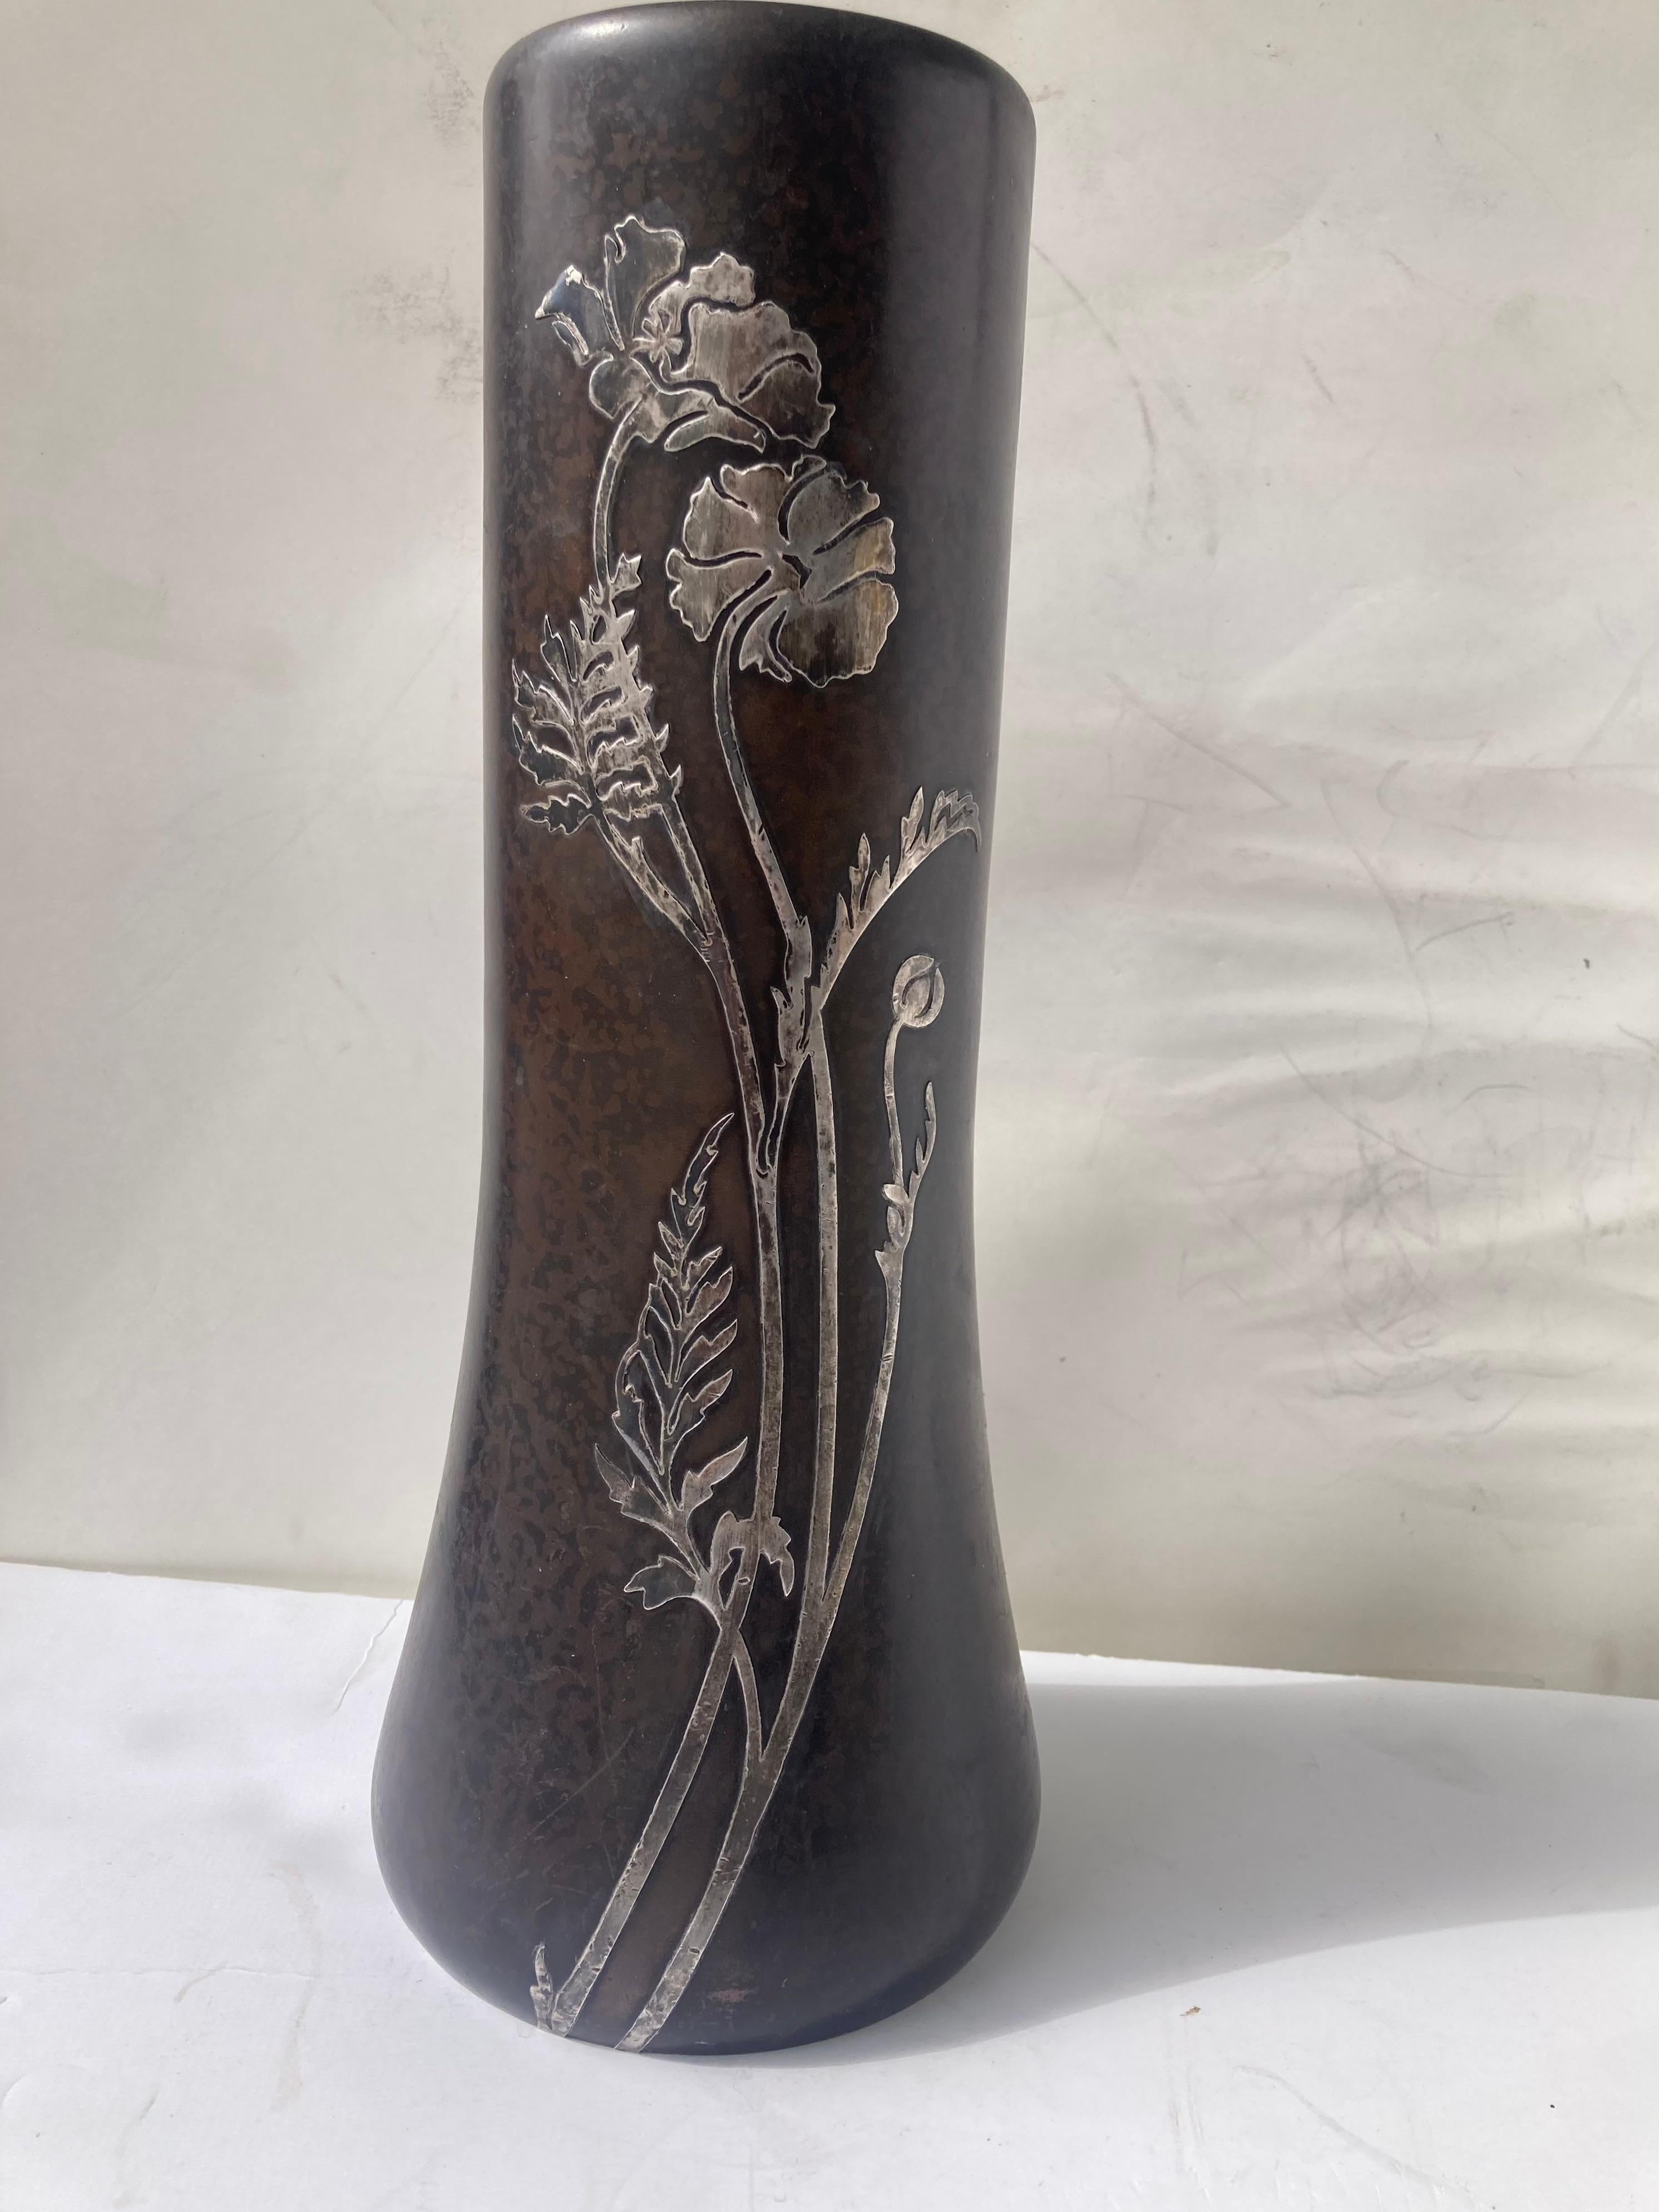 Amazing arts & crafts bronze and sterling overlay vase. marked 3809 plus Heintz Logo. Seems that has been cleaned by hand and patina seems in great antique condition.